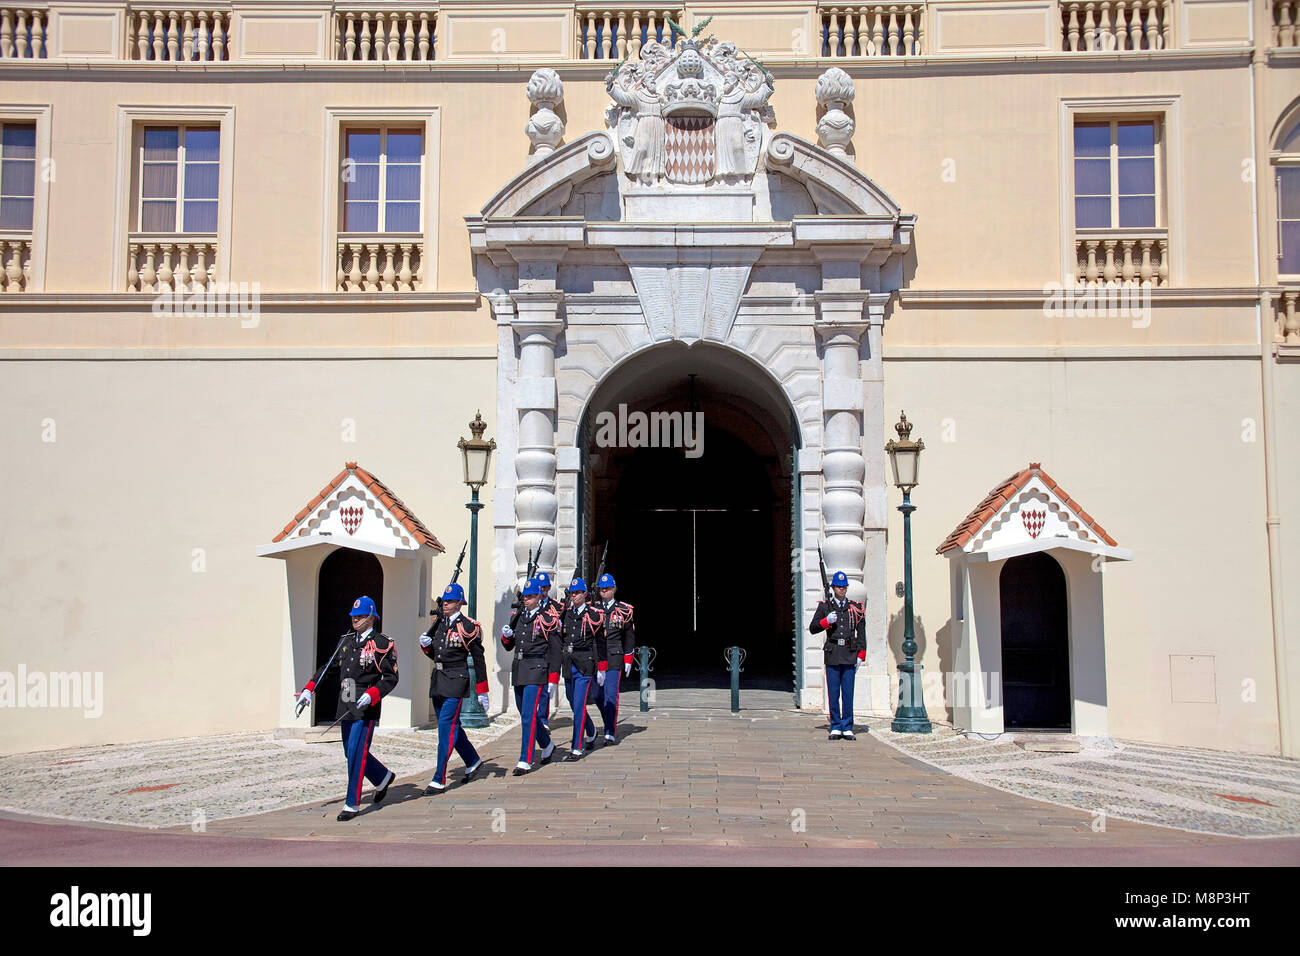 Changing of the guard, Palace Guards at Palais Princier, Princes Palace of Monaco, official residence of the Sovereign Prince of Monaco, Côte d'Azur Stock Photo